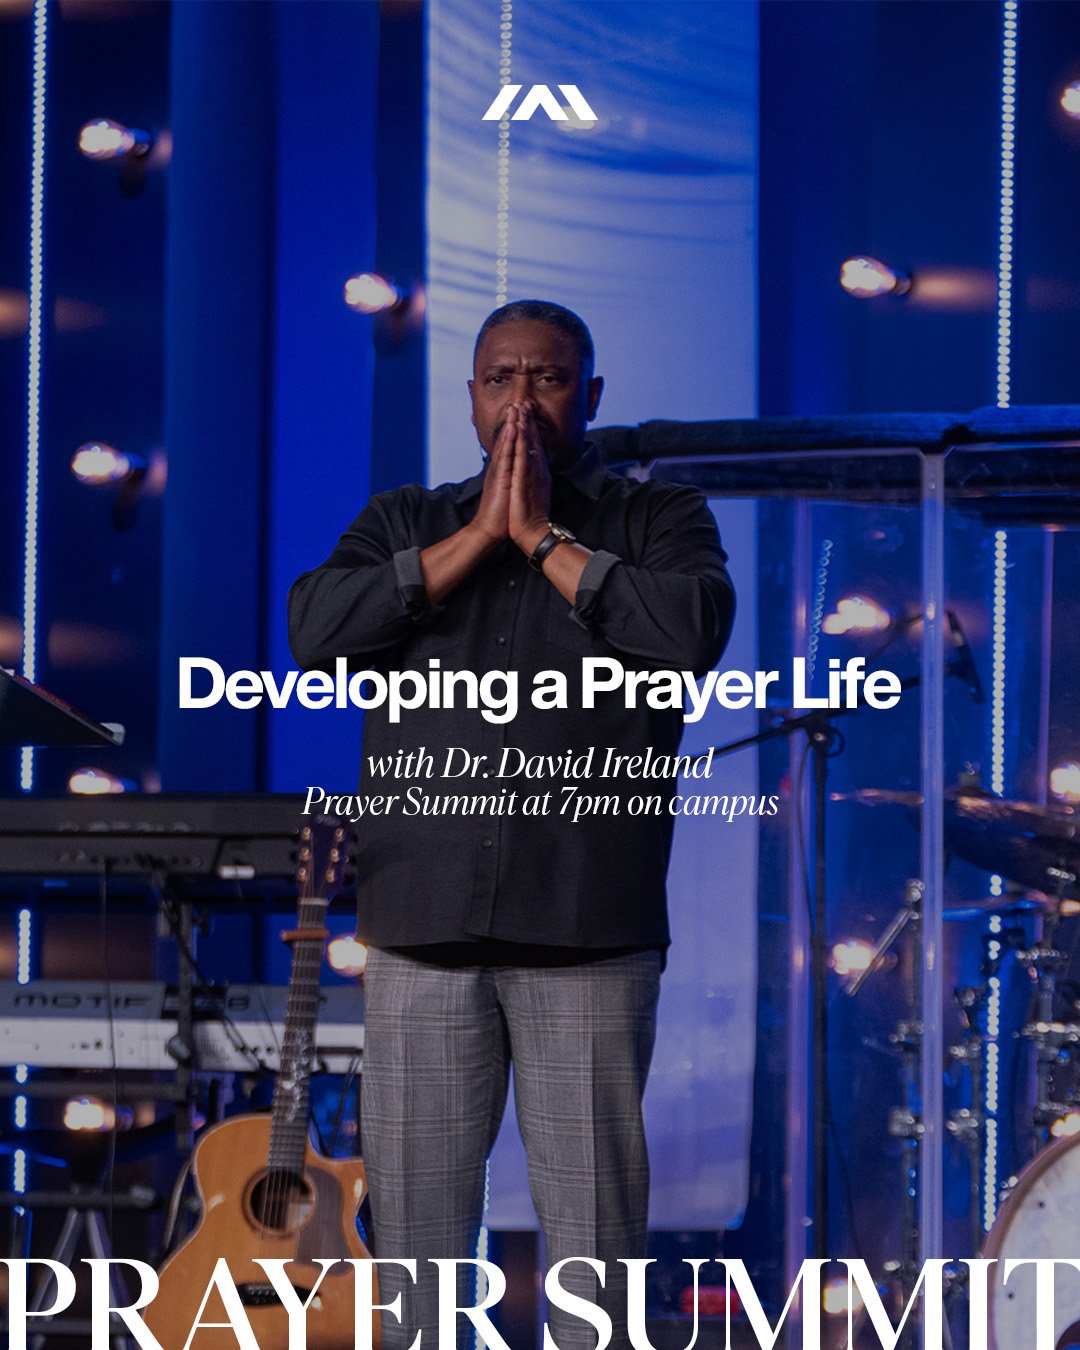 Excited for tonight's Prayer Summit with Dr. David Ireland! 🙏 Join us on campus at 7pm for a teaching on Developing a Prayer Life. See you there!